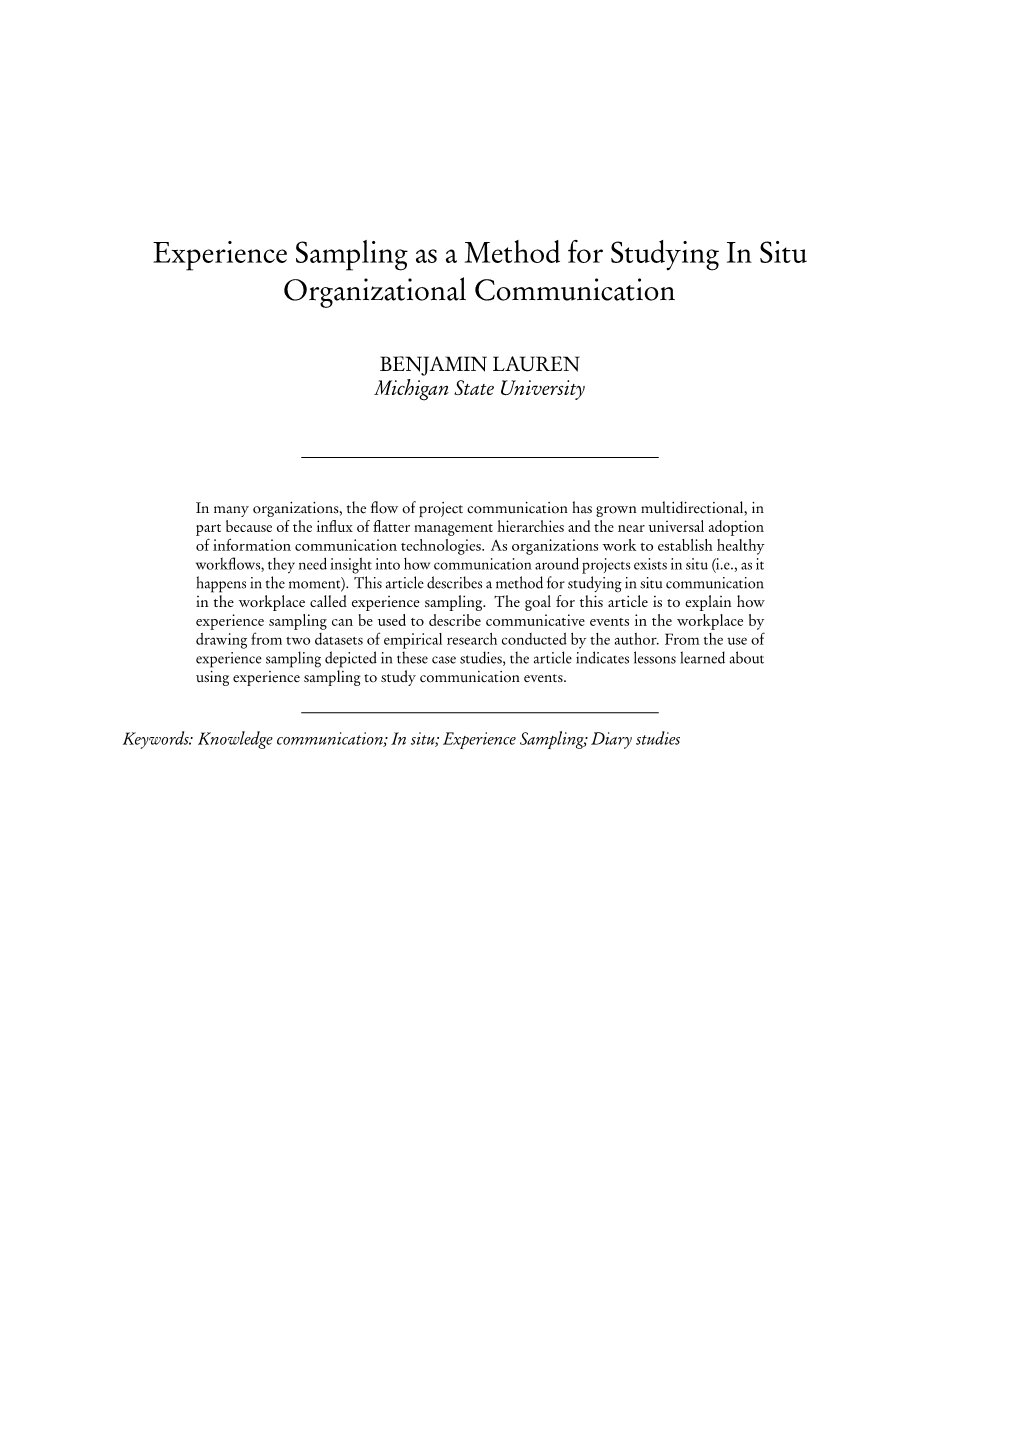 Experience Sampling As a Method for Studying in Situ Organizational Communication